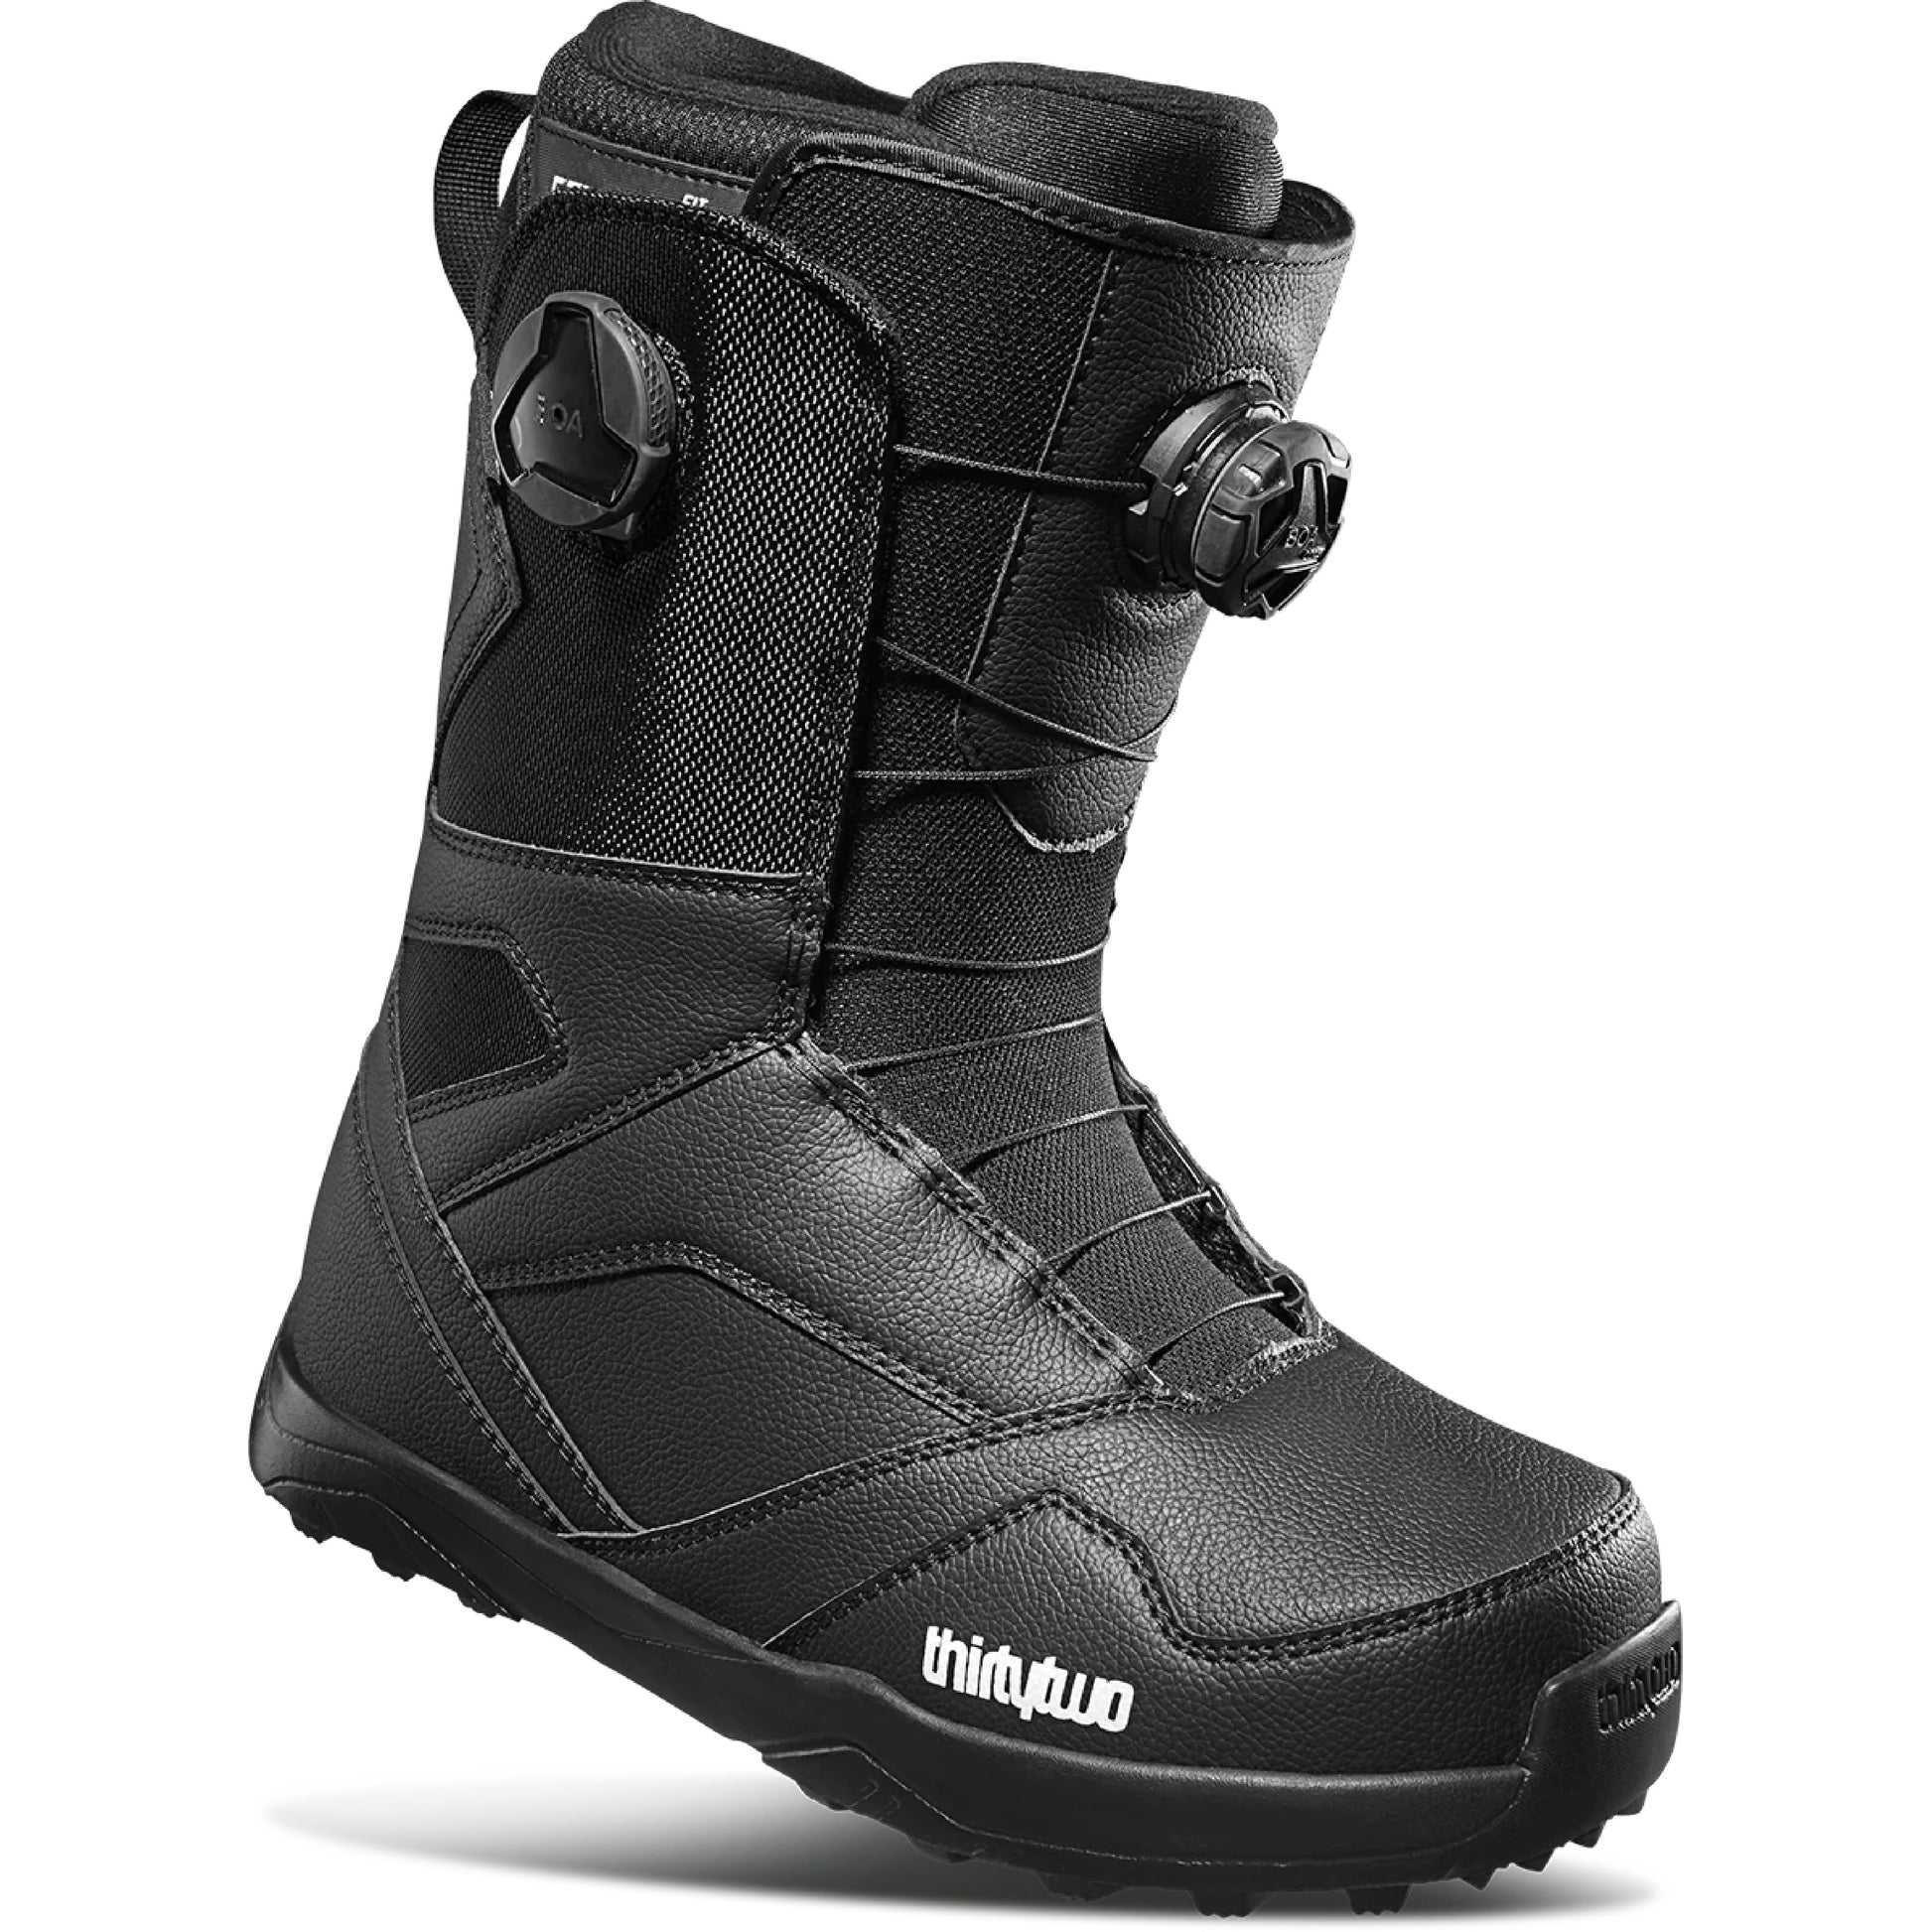 ThirtyTwo STW Double BOA Snowboard Boots Black Snowboard Boots